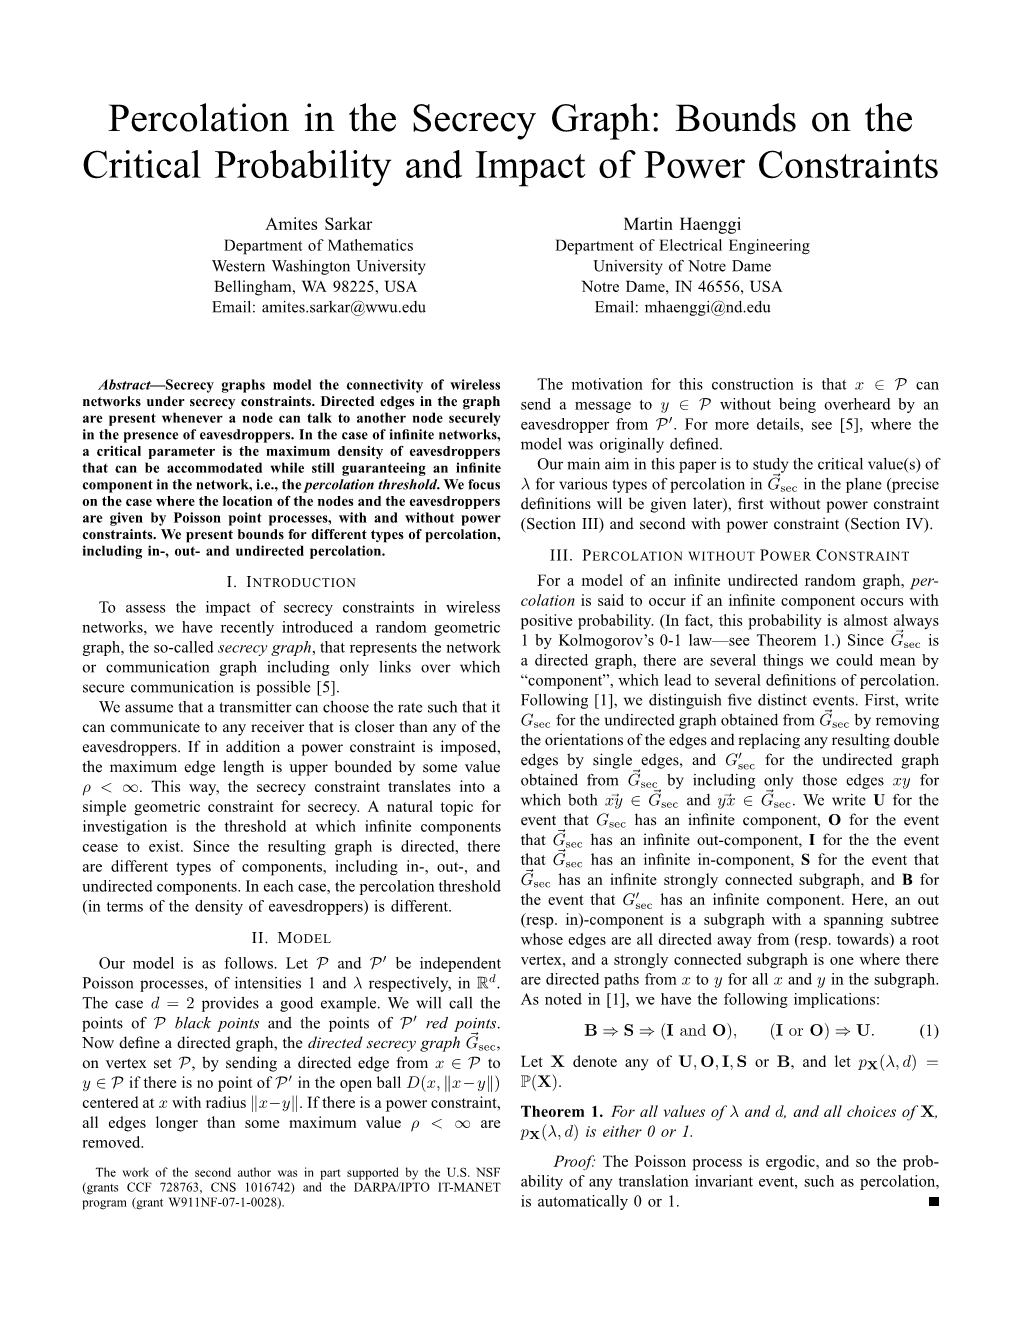 Percolation in the Secrecy Graph: Bounds on the Critical Probability and Impact of Power Constraints